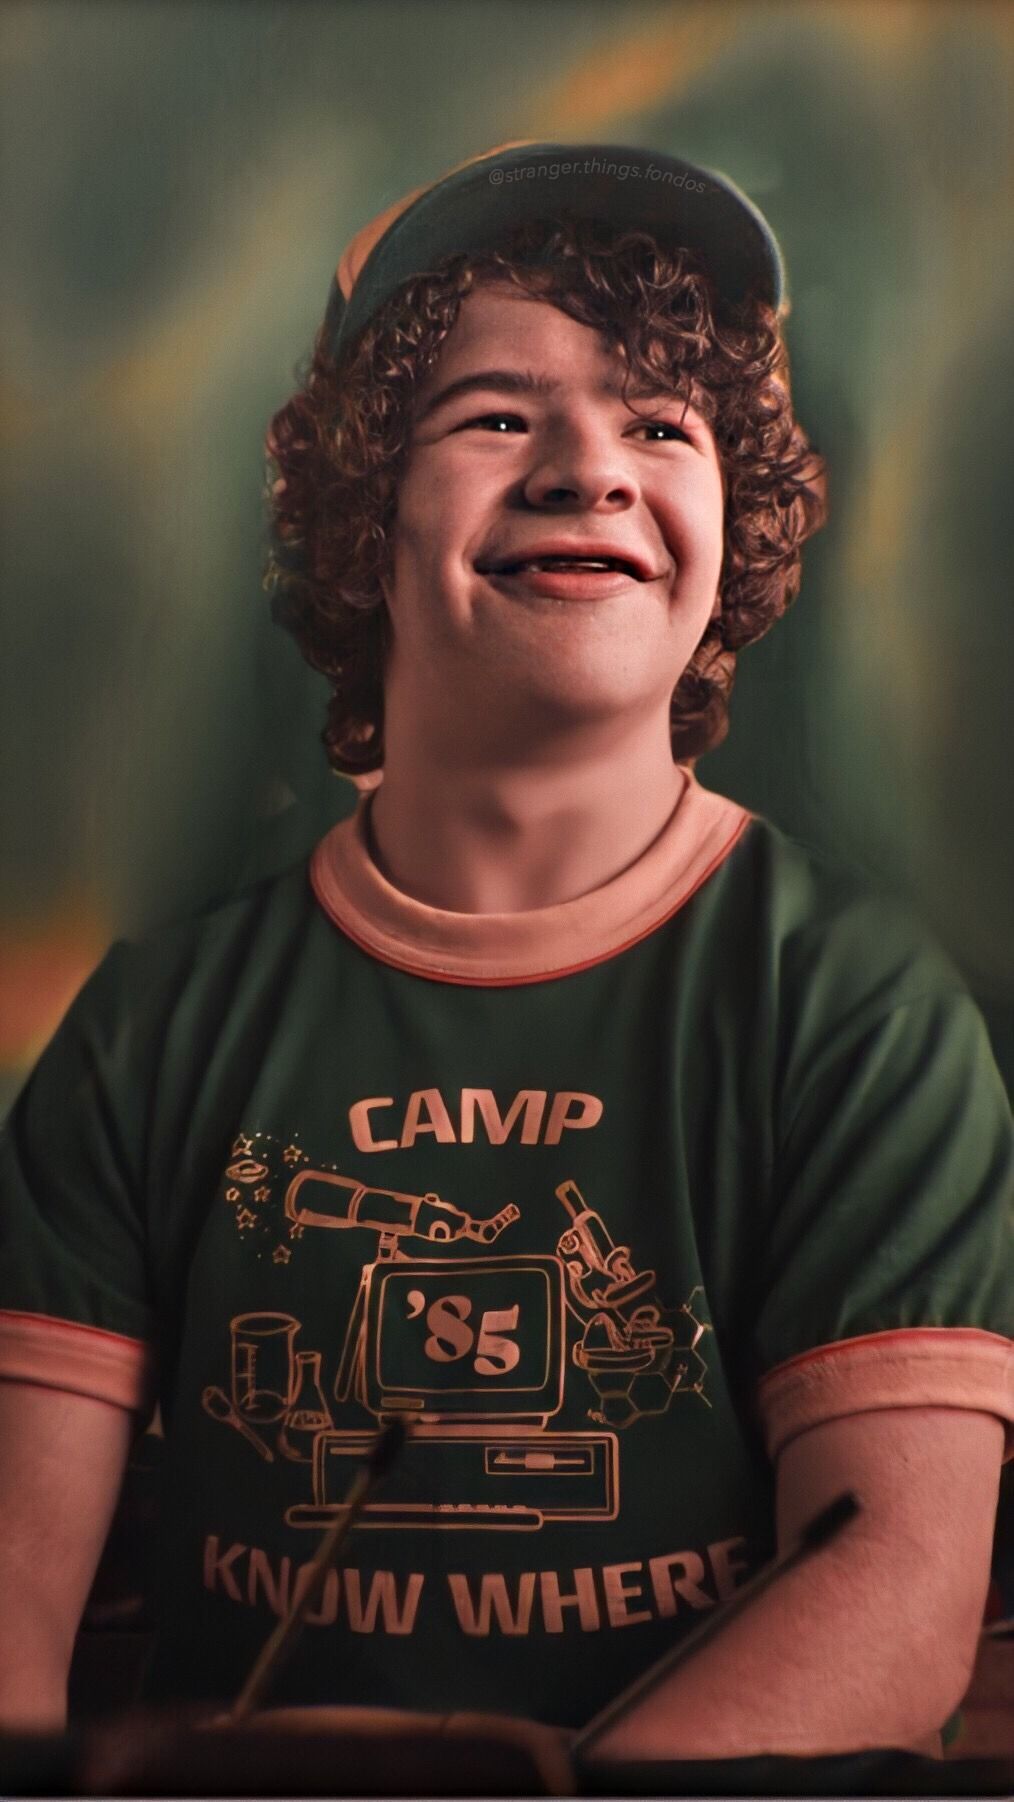 dustin, Stranger things quote